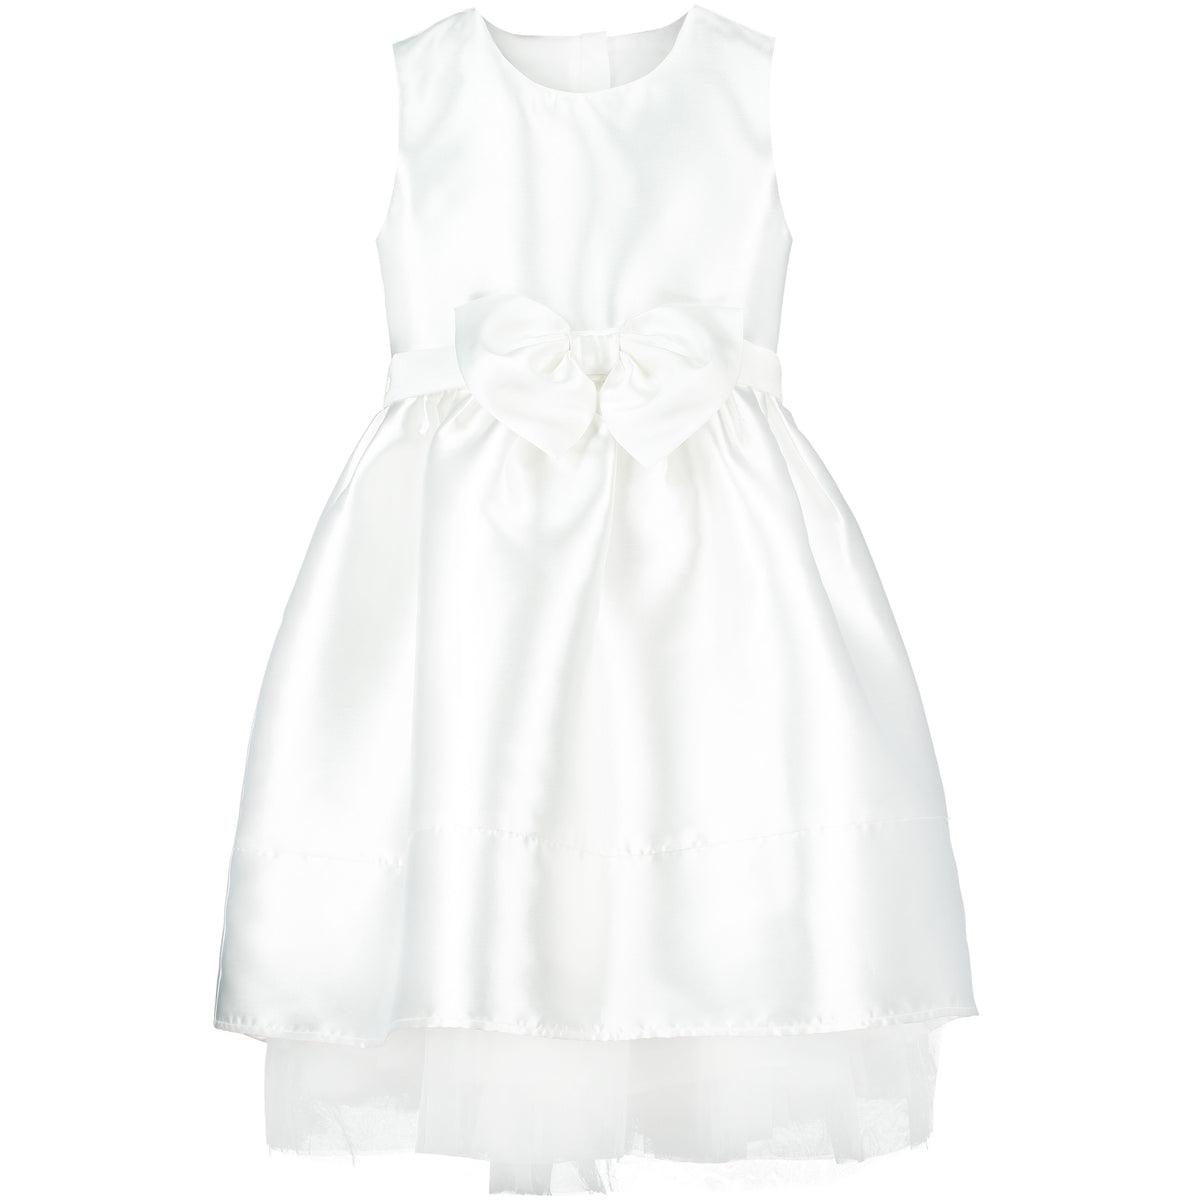 Girls Party Dress Florence Ivory Taffeta Bow | Holly Hastie London